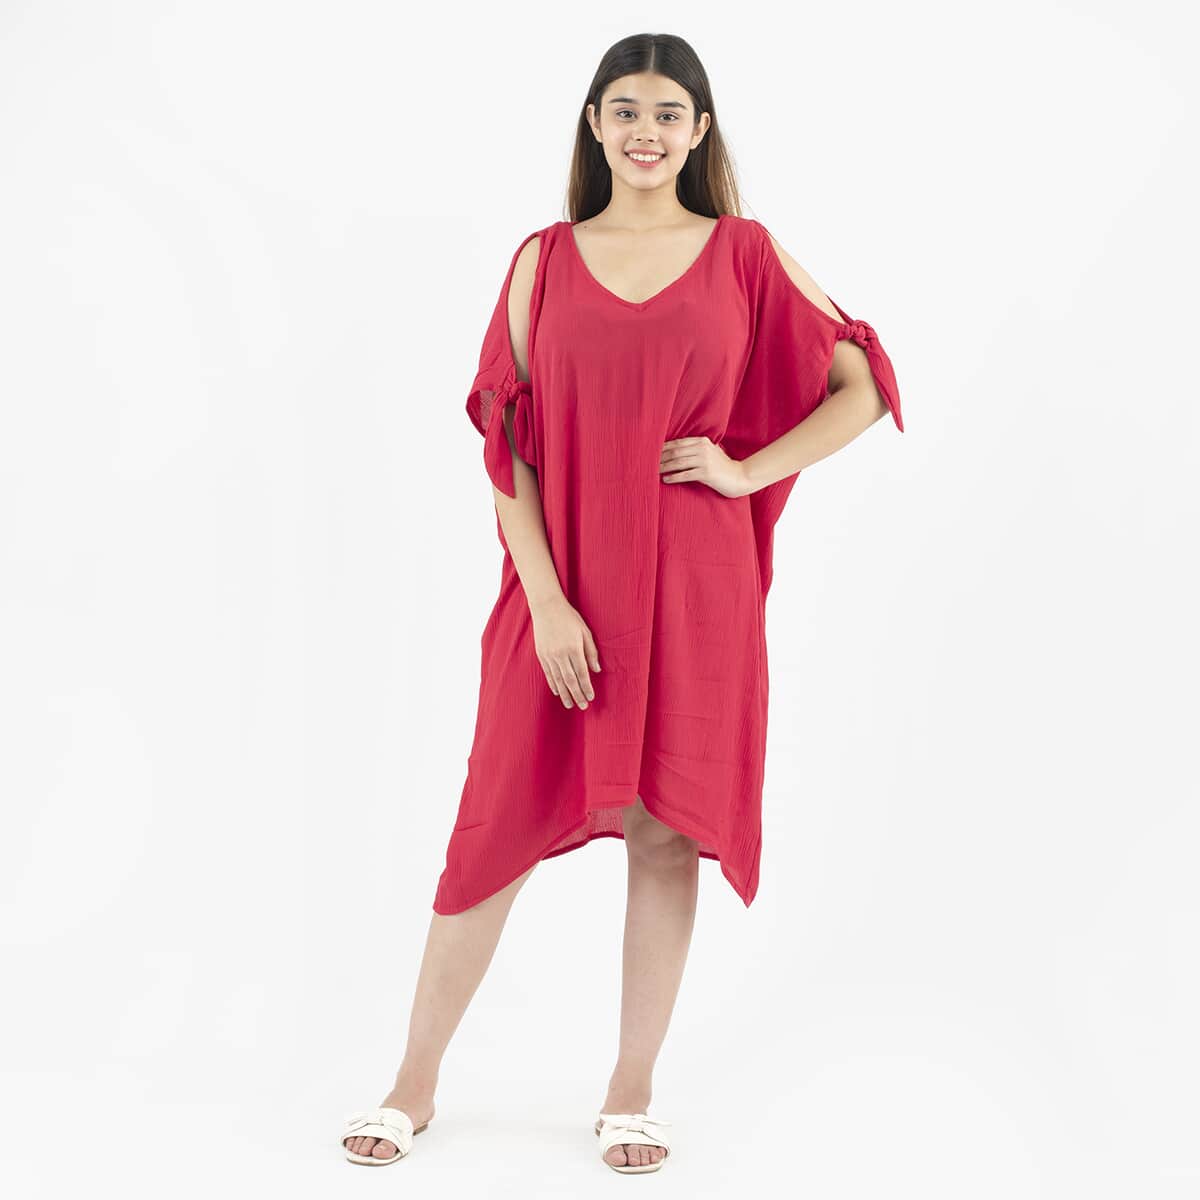 Tamsy Red V-Neck Dress with Tie Sleeves - One Size Fits Most image number 0